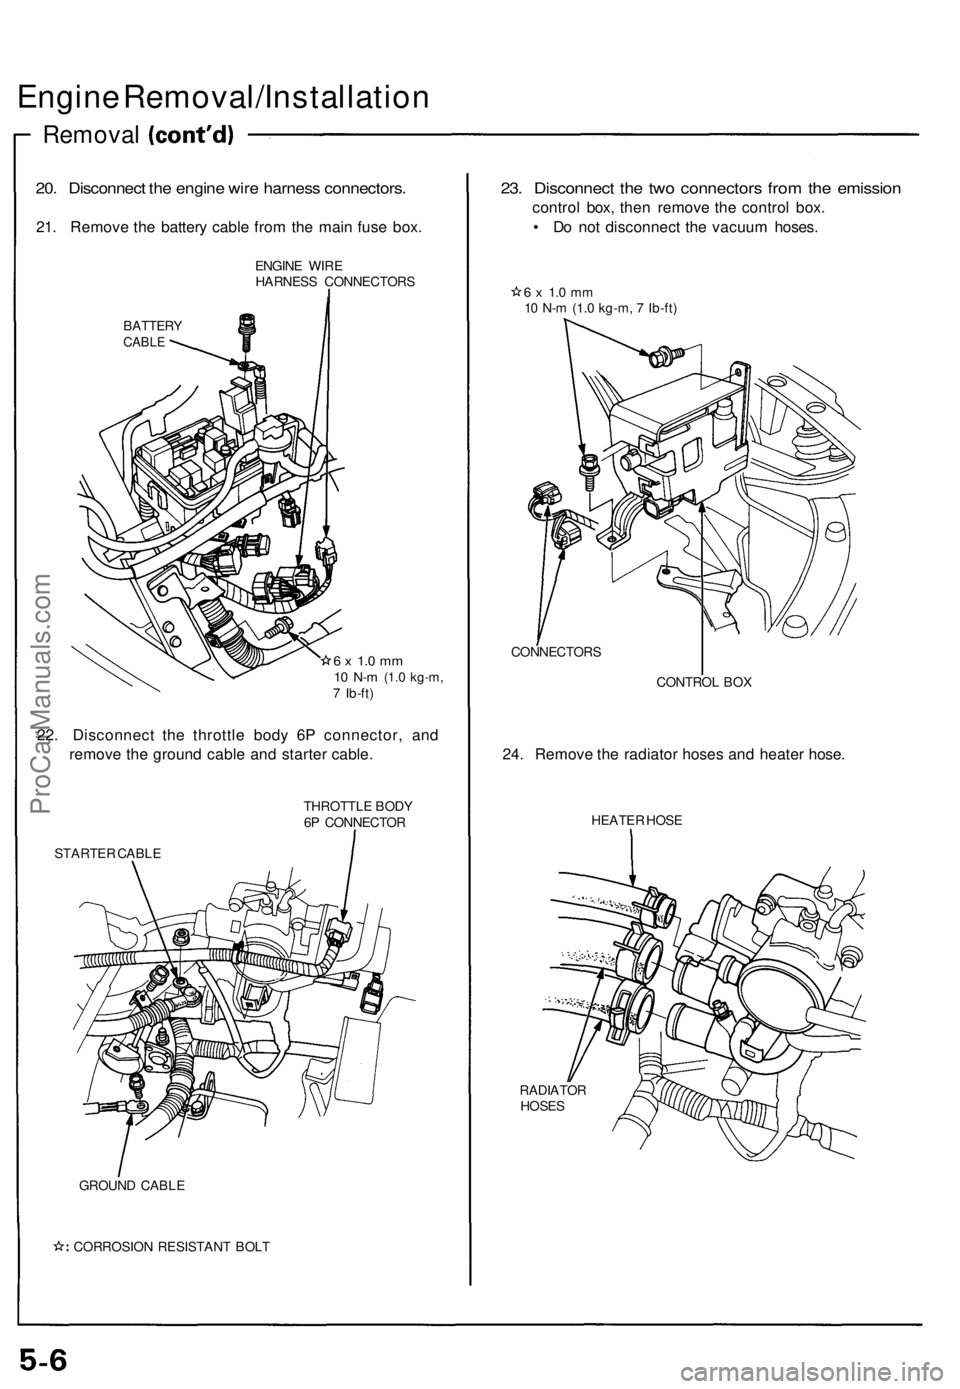 ACURA NSX 1991  Service Repair Manual 
Engine Removal/Installation

Removal

20. Disconnect the engine wire harness connectors.

21. Remove the battery cable from the main fuse box.

ENGINE WIRE

HARNESS CONNECTORS

BATTERY

CABLE

6 x 1.